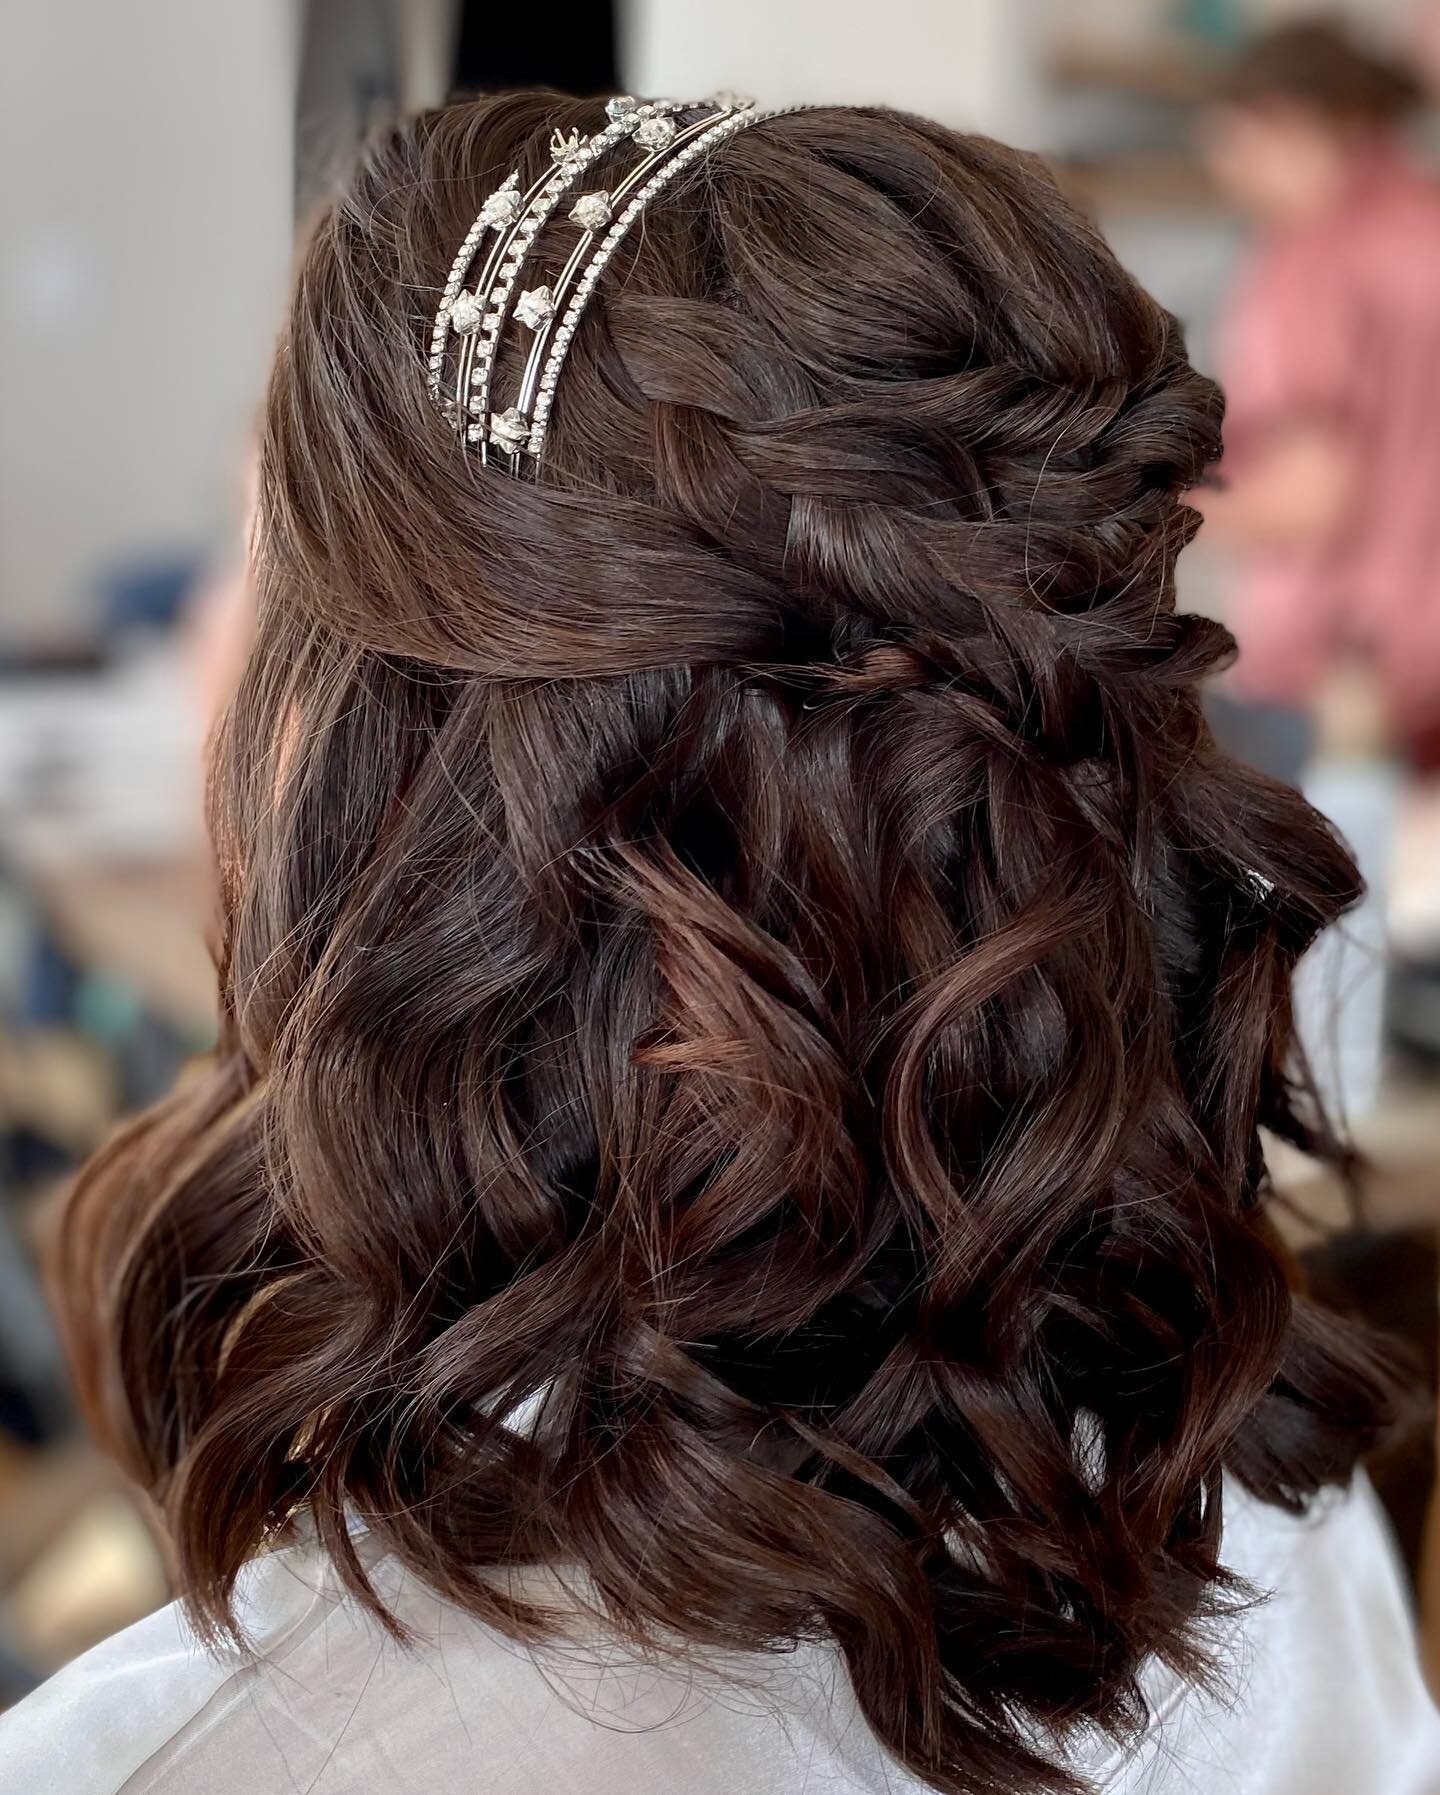 Two different brides, similiar styles, but completely different hair colours, textures and thickness! 

Grace went for a textured half-up with a braid and a headband, whilst Kimberley went for a half-up with twists and no extra accessories. Which one